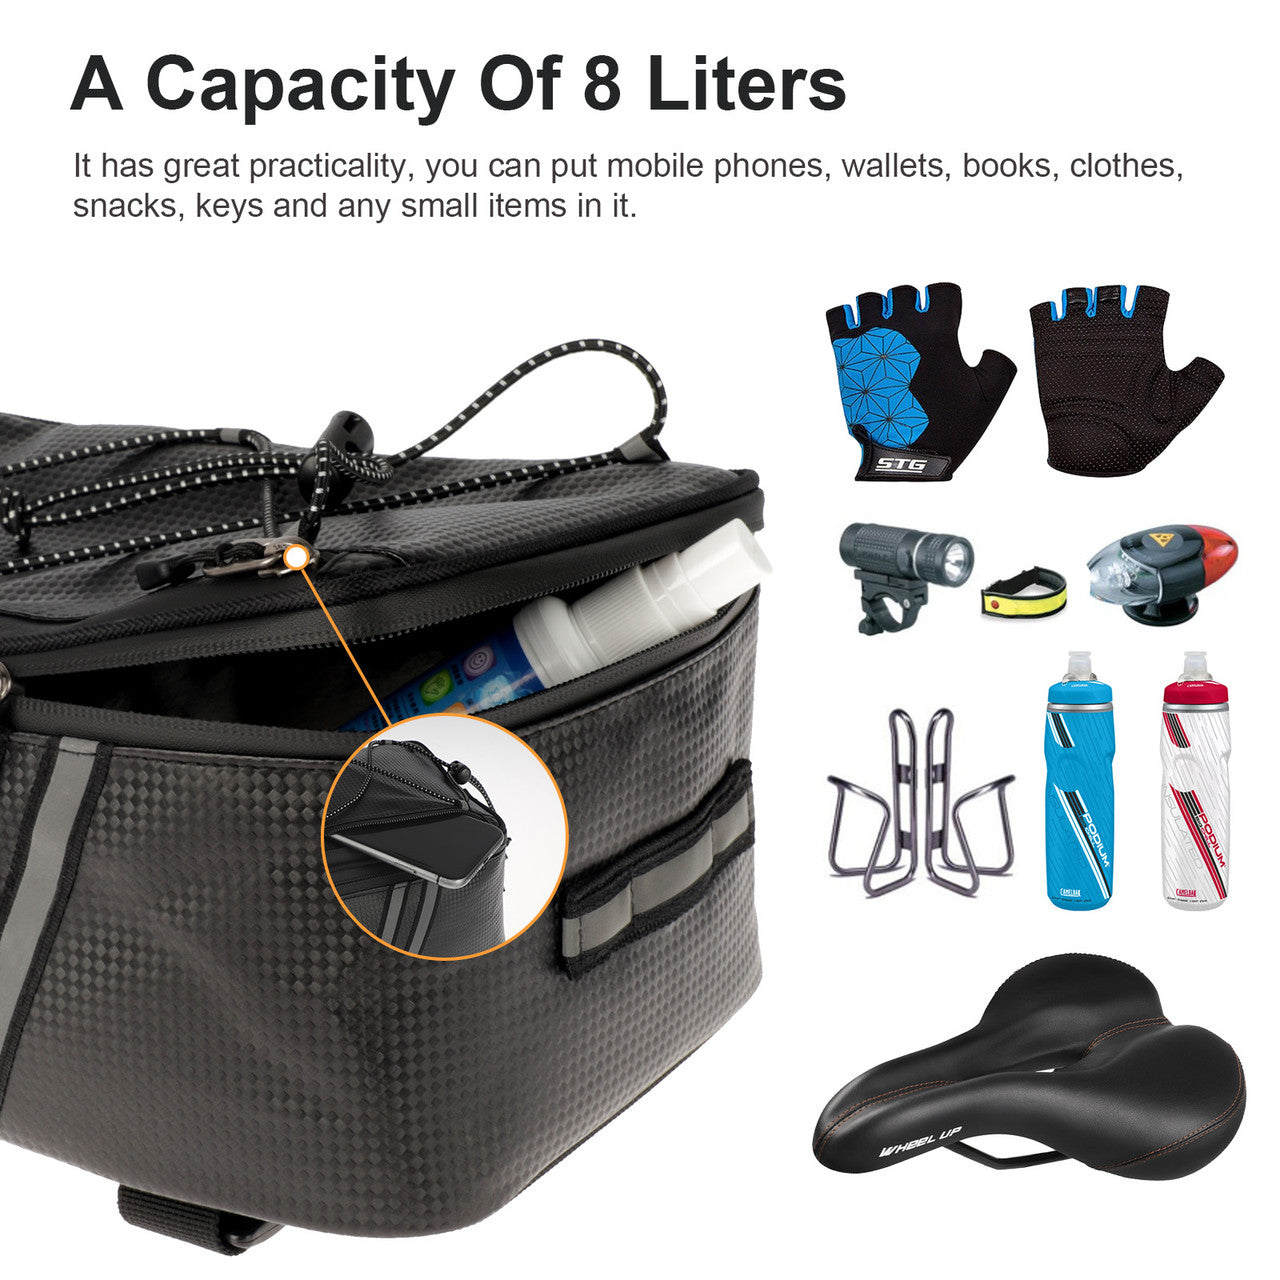 Bicycle Rear Seat Storage Bag for Local and Mid-Range Distances